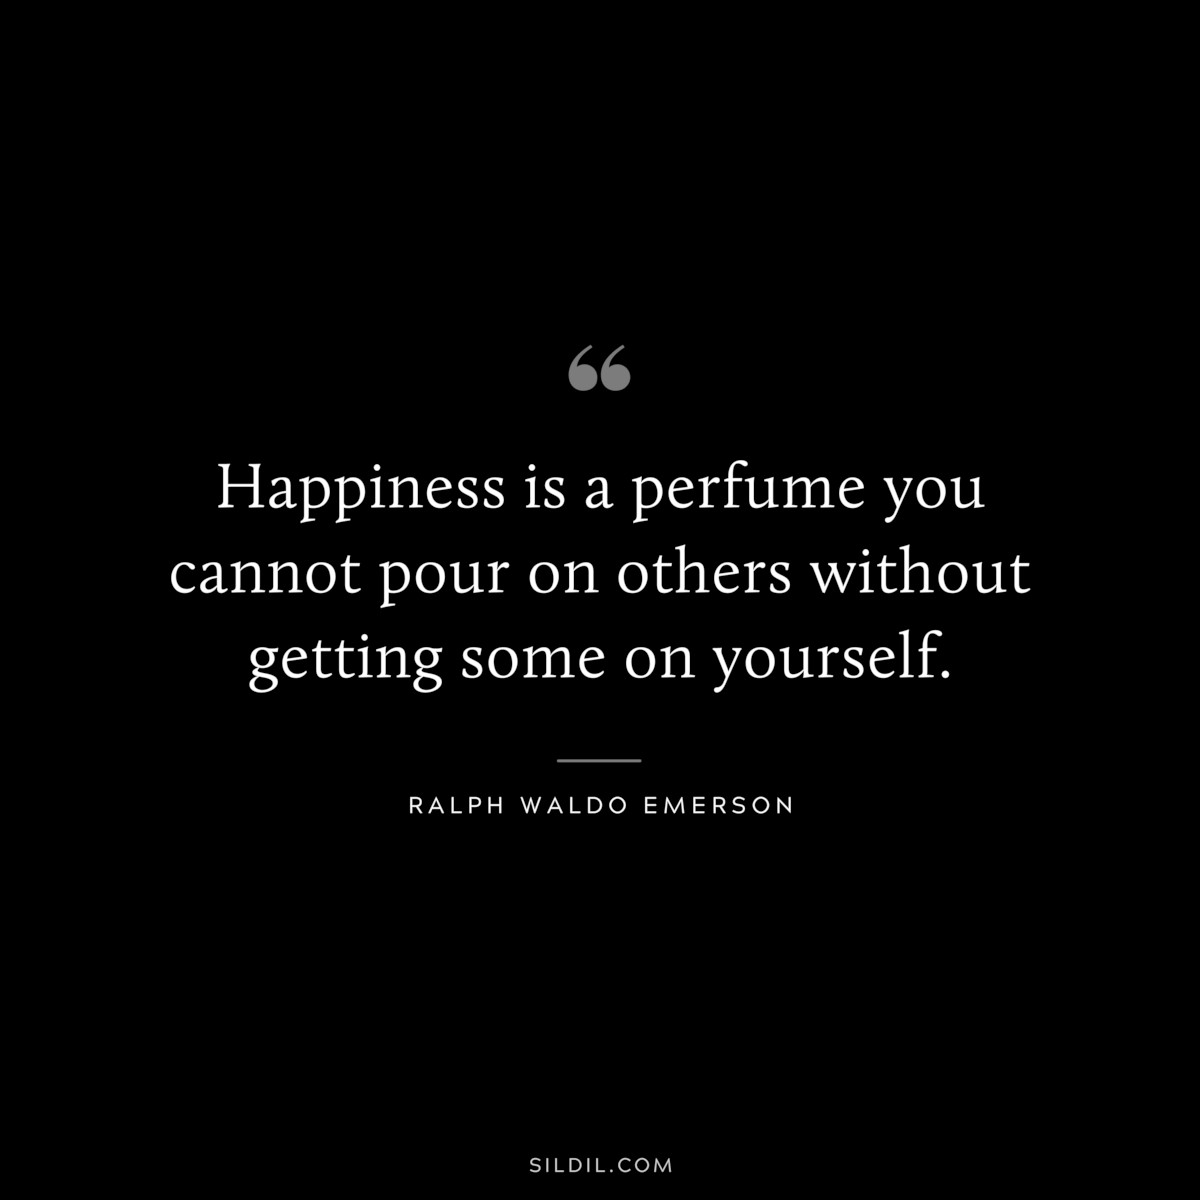 Happiness is a perfume you cannot pour on others without getting some on yourself. — Ralph Waldo Emerson